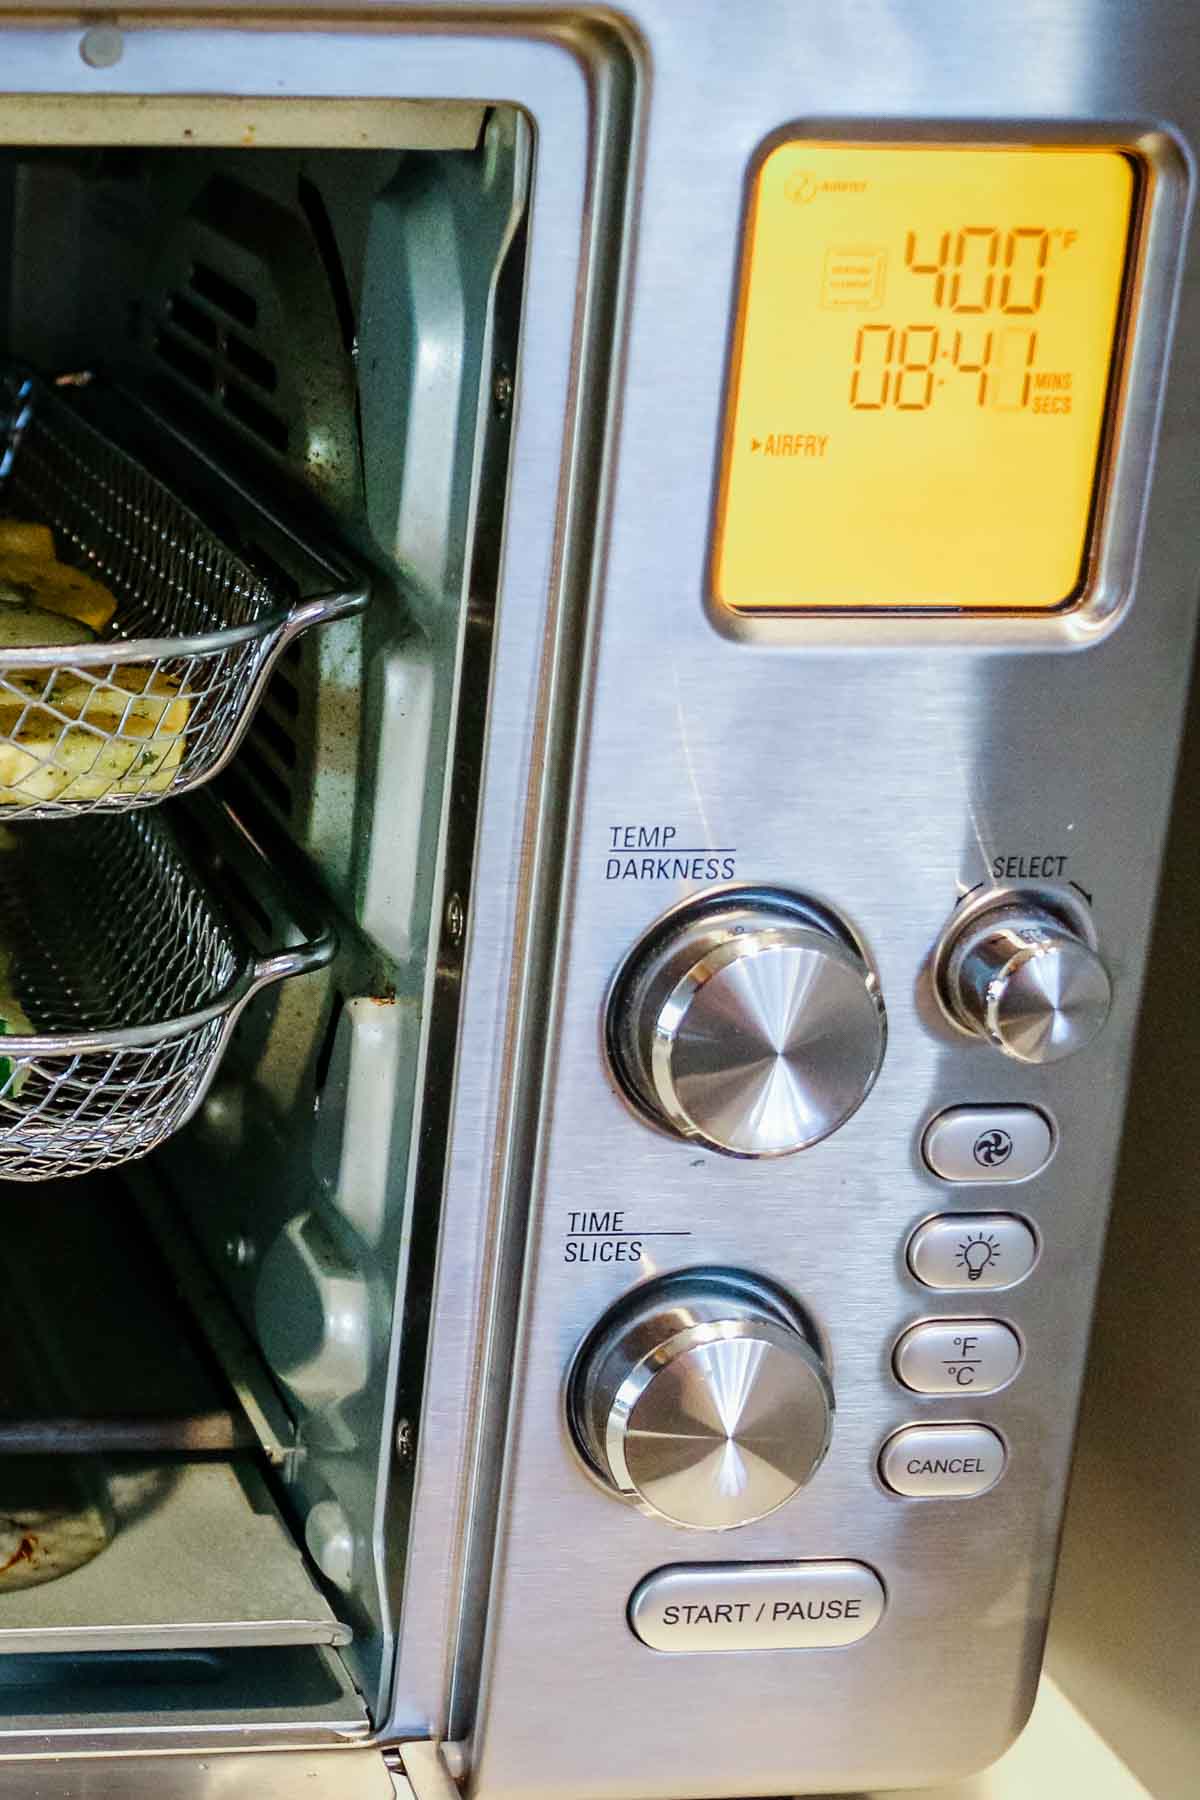 close up of convection oven air fryer with display screen.